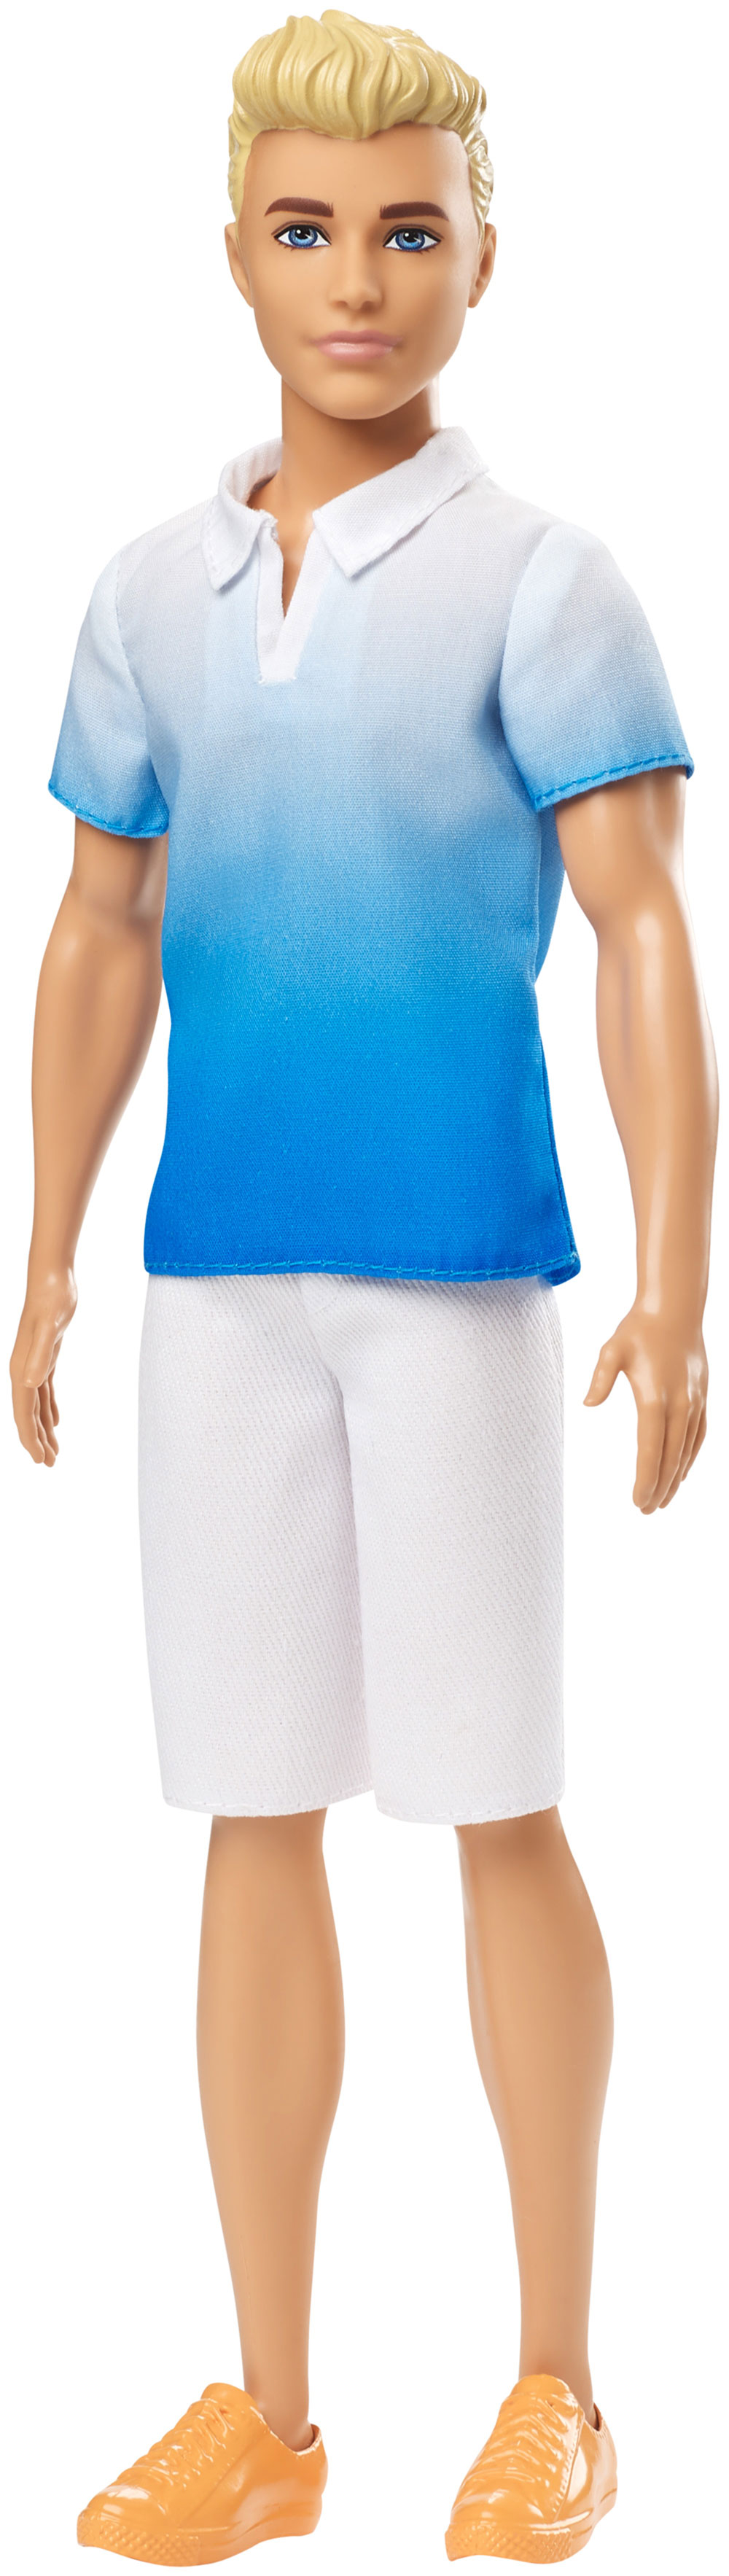 Ken Fashionistas Doll 129 Wearing Blue Ombre Shirt | Toys R Us Canada